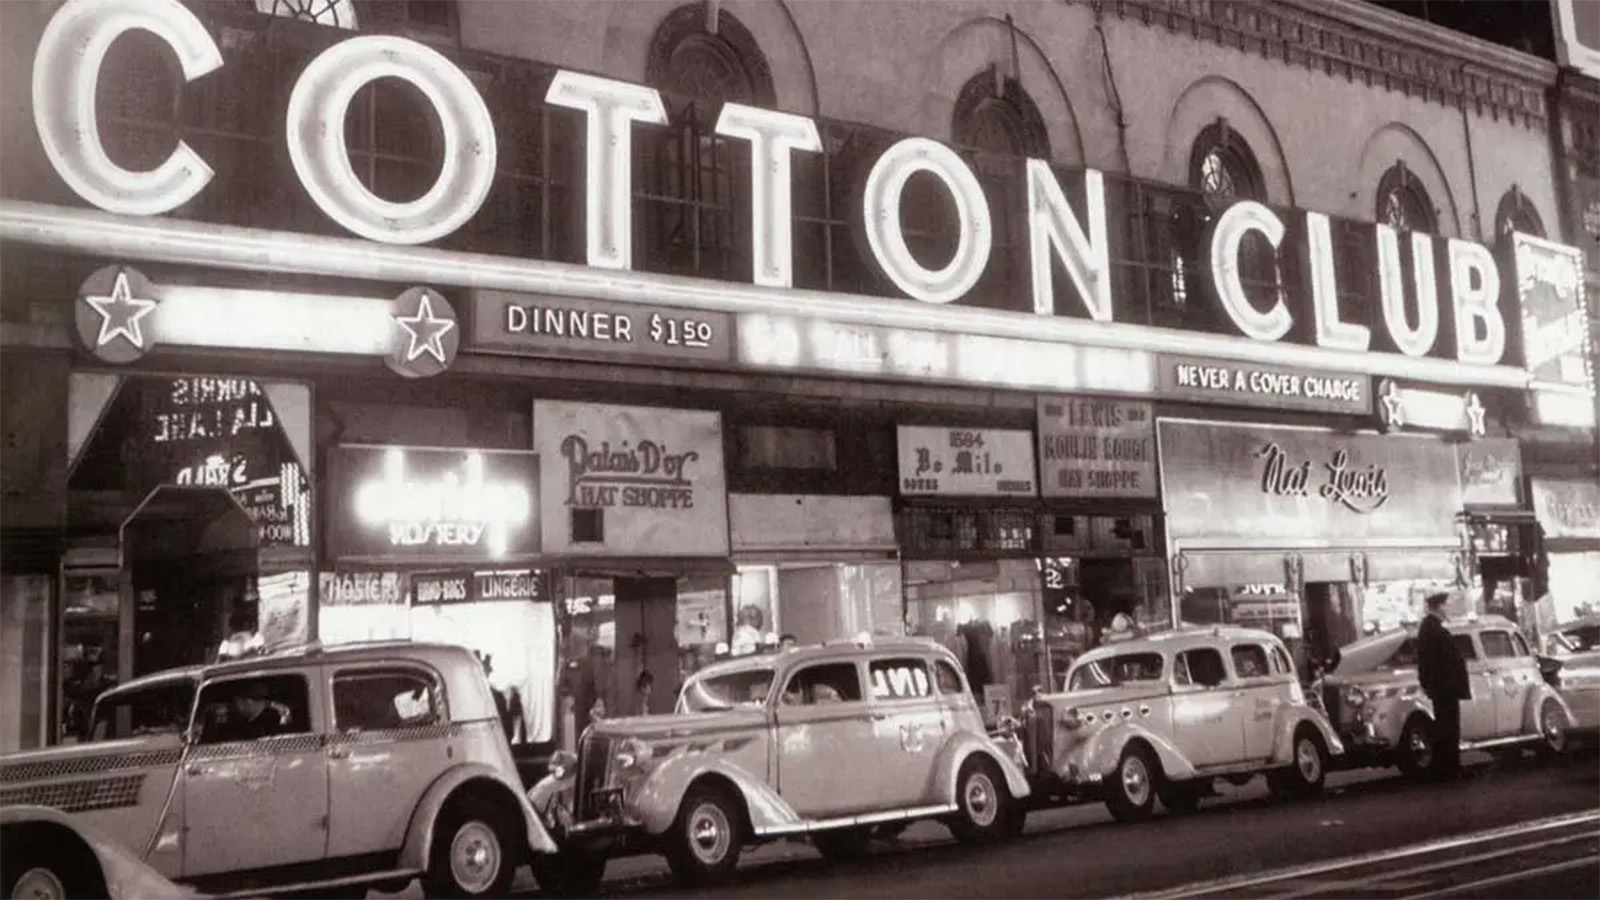 A photo of a street view of the Cotton Club, featuring its main building sign lit up. Old-fashioned vehicles are parked in a line along the street.  